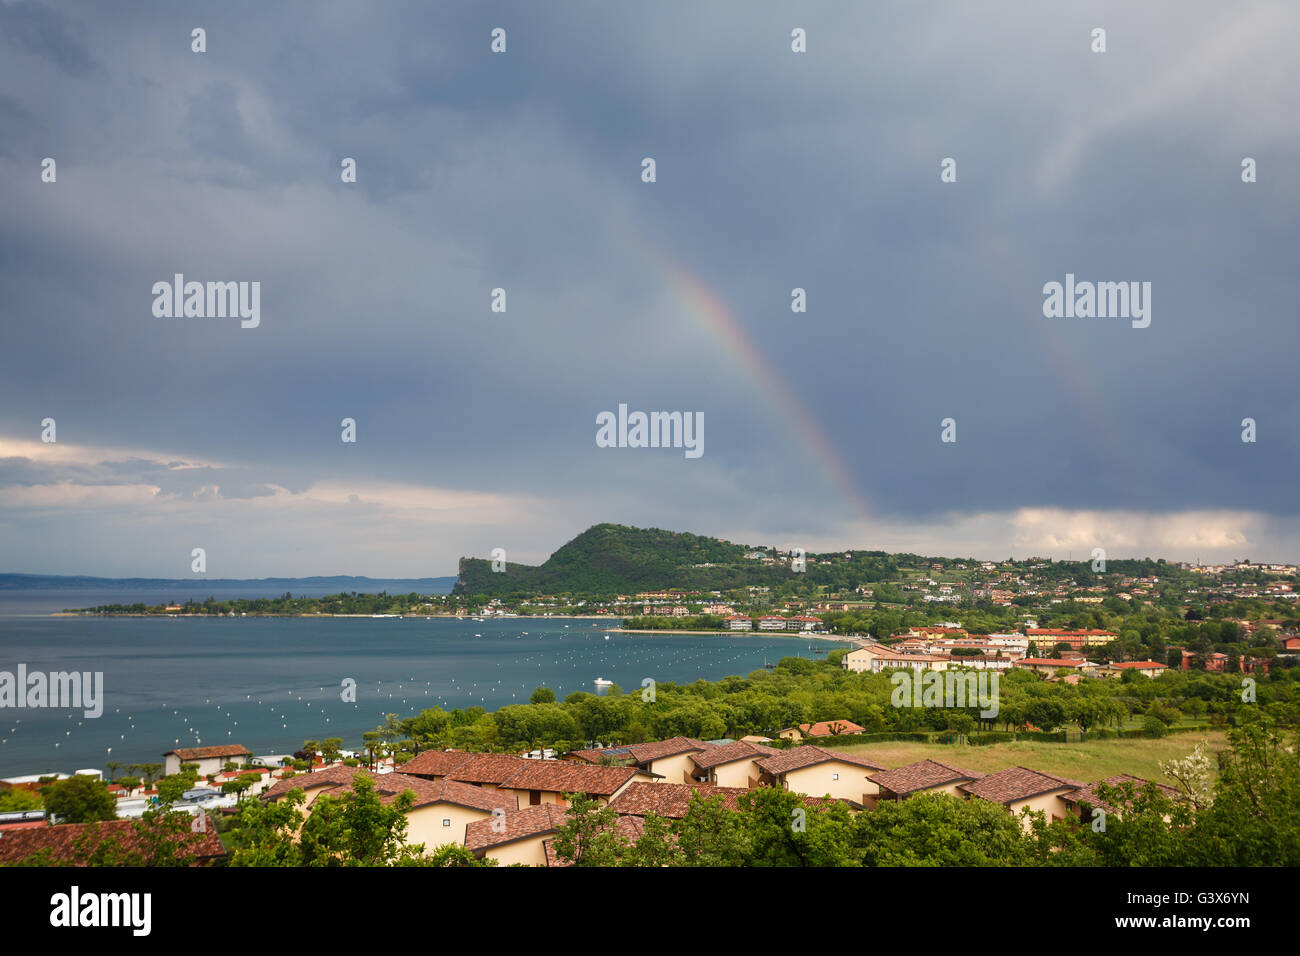 Rainbow over the bay in Southern part of Lake Garda, Italy Stock Photo